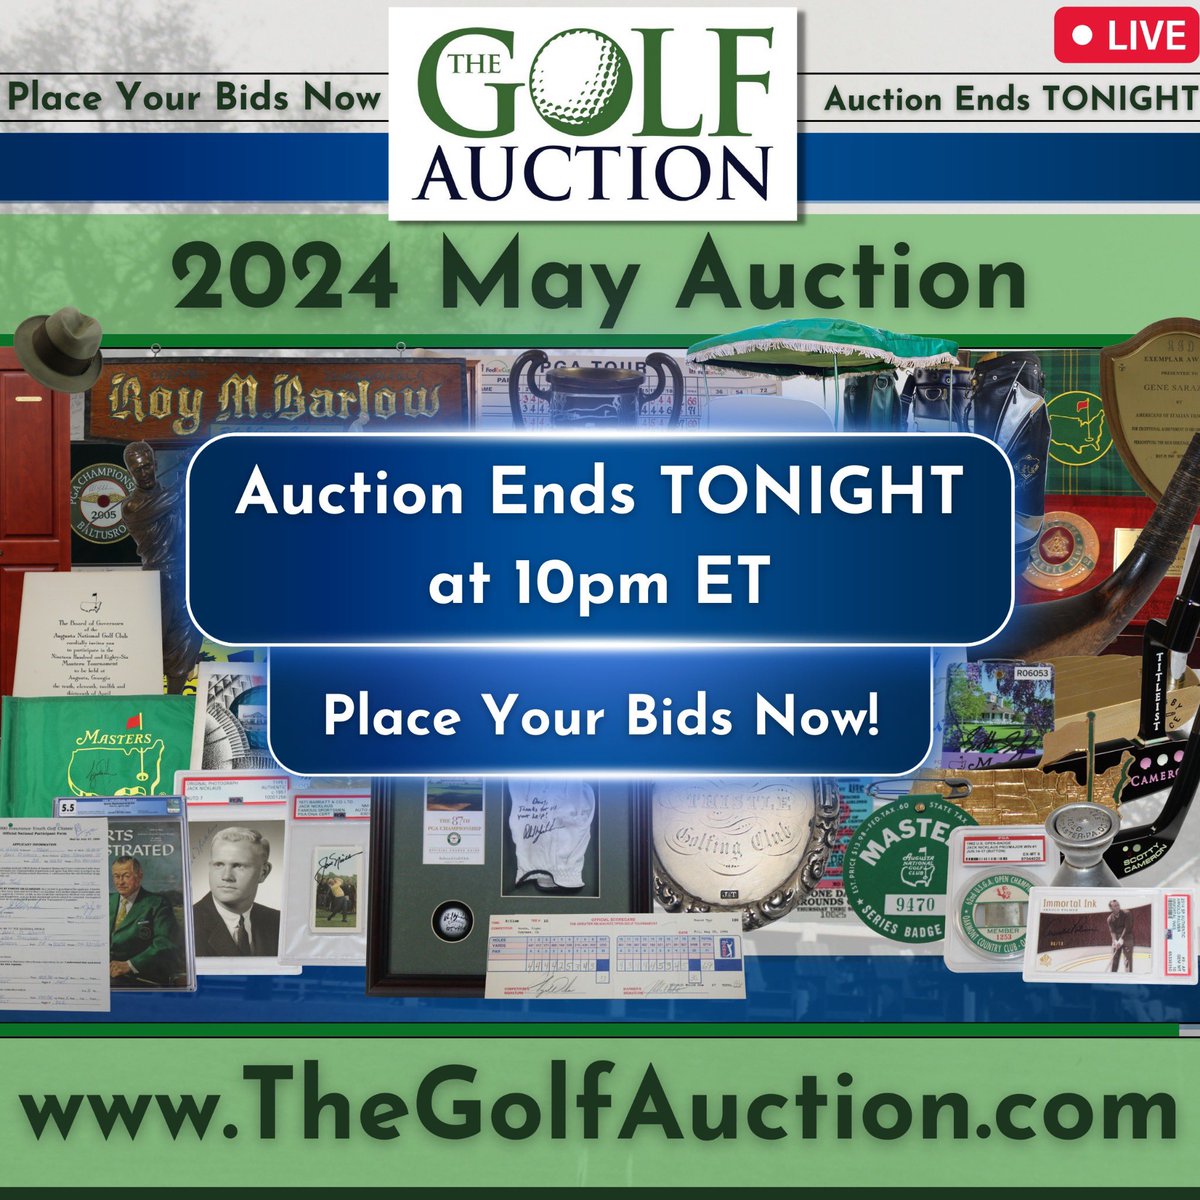 Our 2024 May Golf Memorabilia Auction will come to a close at 10pm ET TONIGHT with extended bidding to follow.

Don’t miss out, place your bids now ⛳️

@JohnMorton215 @darrenrovell @PGAChampionship #thegolfauction @BaltusrolGC 

thegolfauction.com/mobile/catalog…